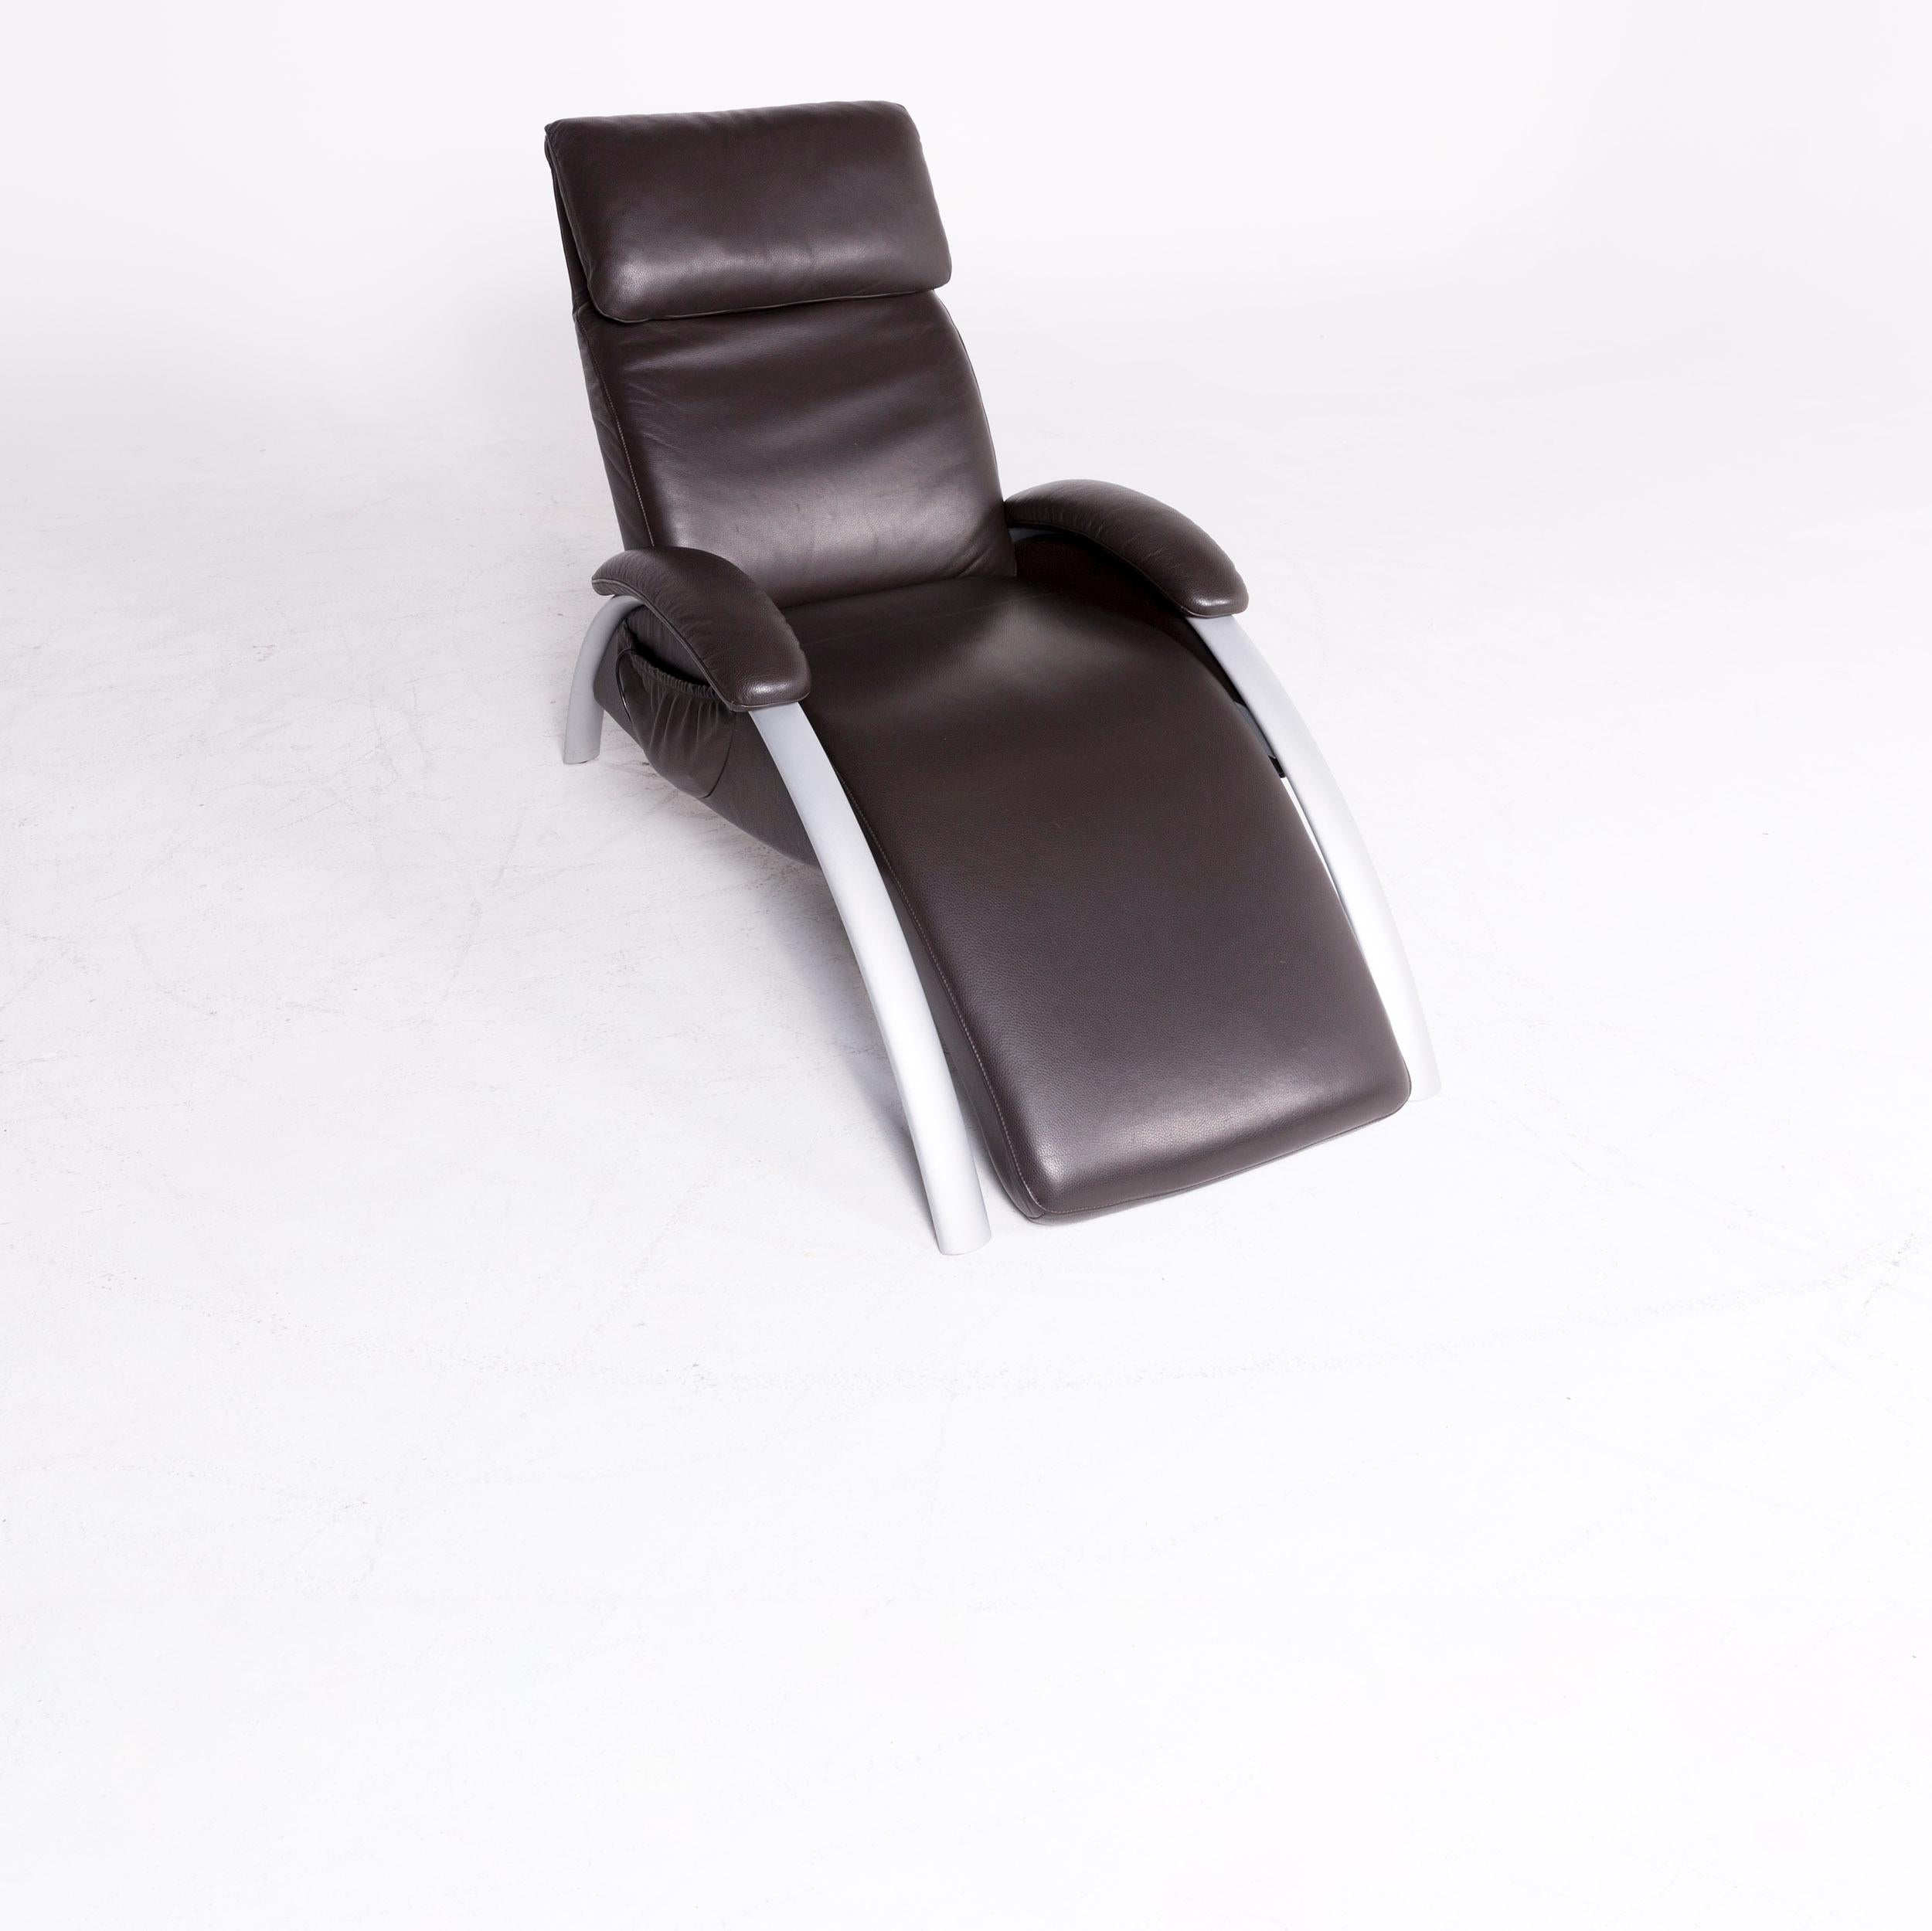 We bring to you a Willi Schillig designer leather lounger brown genuine leather couch electric.

Product measurements in centimeters:

Depth 73
Width 148
Height 100
Seat-height 42
Rest-height 54
Seat-depth 100
Seat-width 48
Back-height